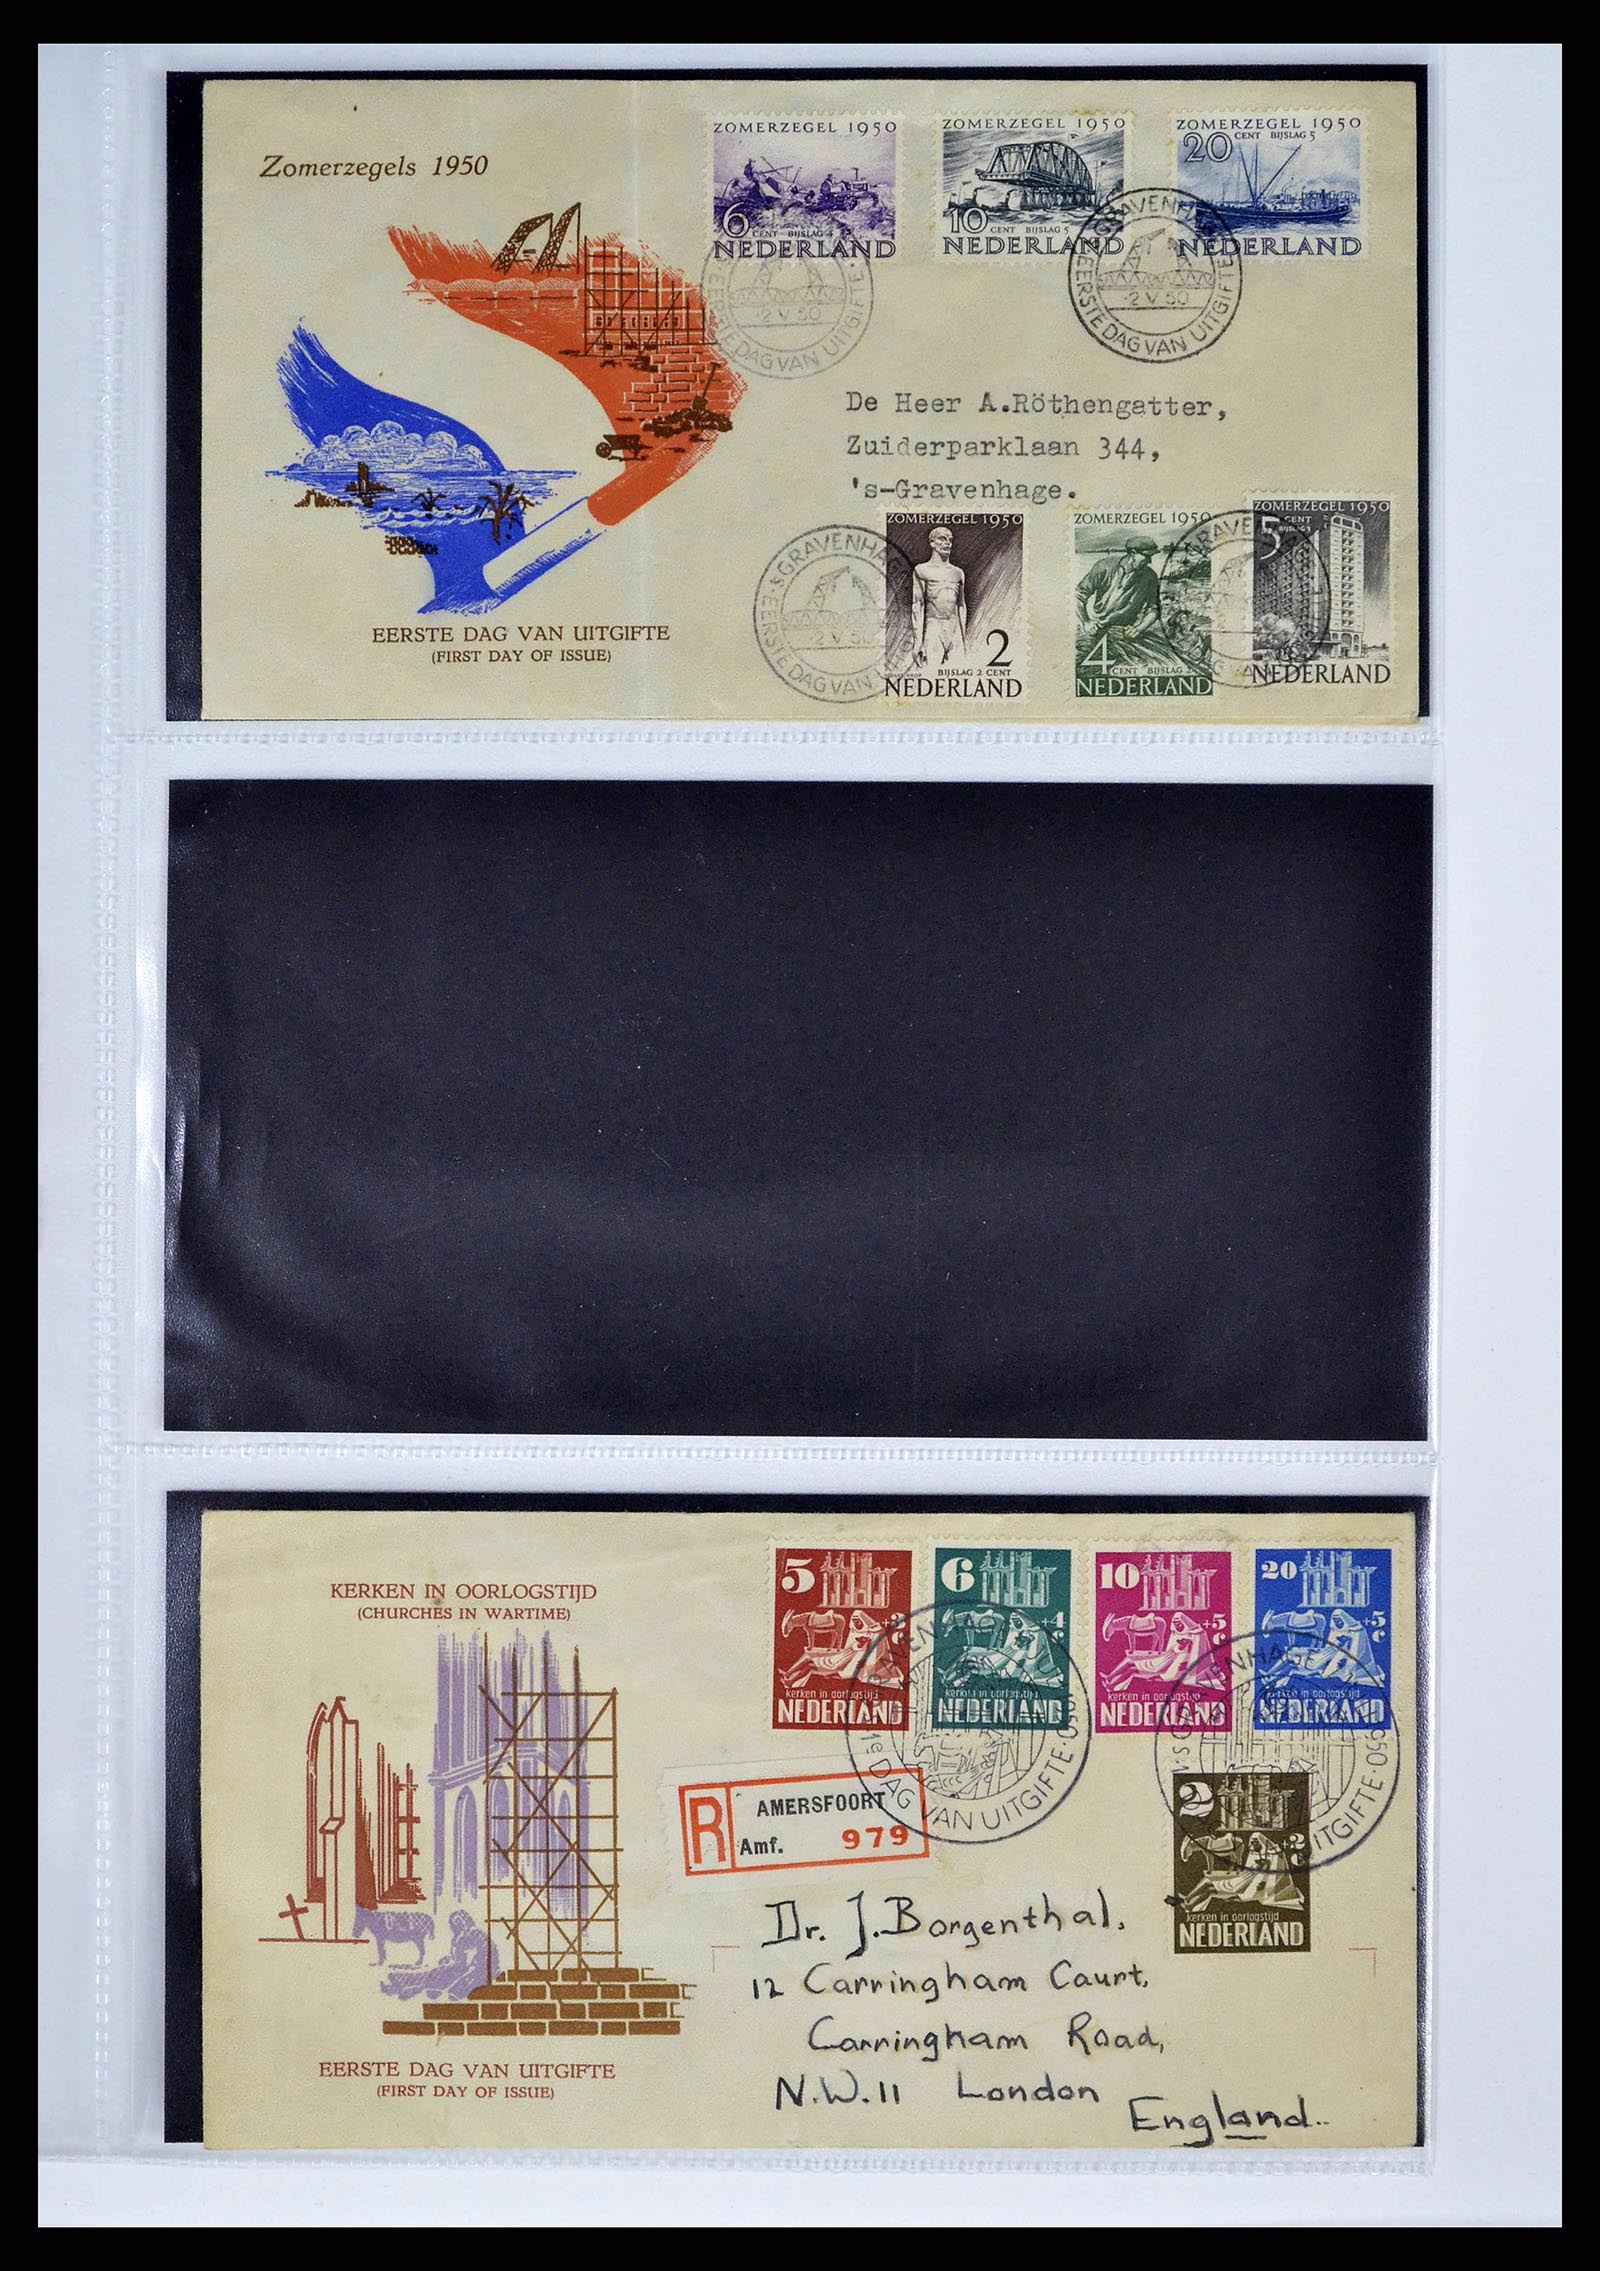 37821 0002 - Stamp collection 37821 Netherlands FDC's 1950-2012.